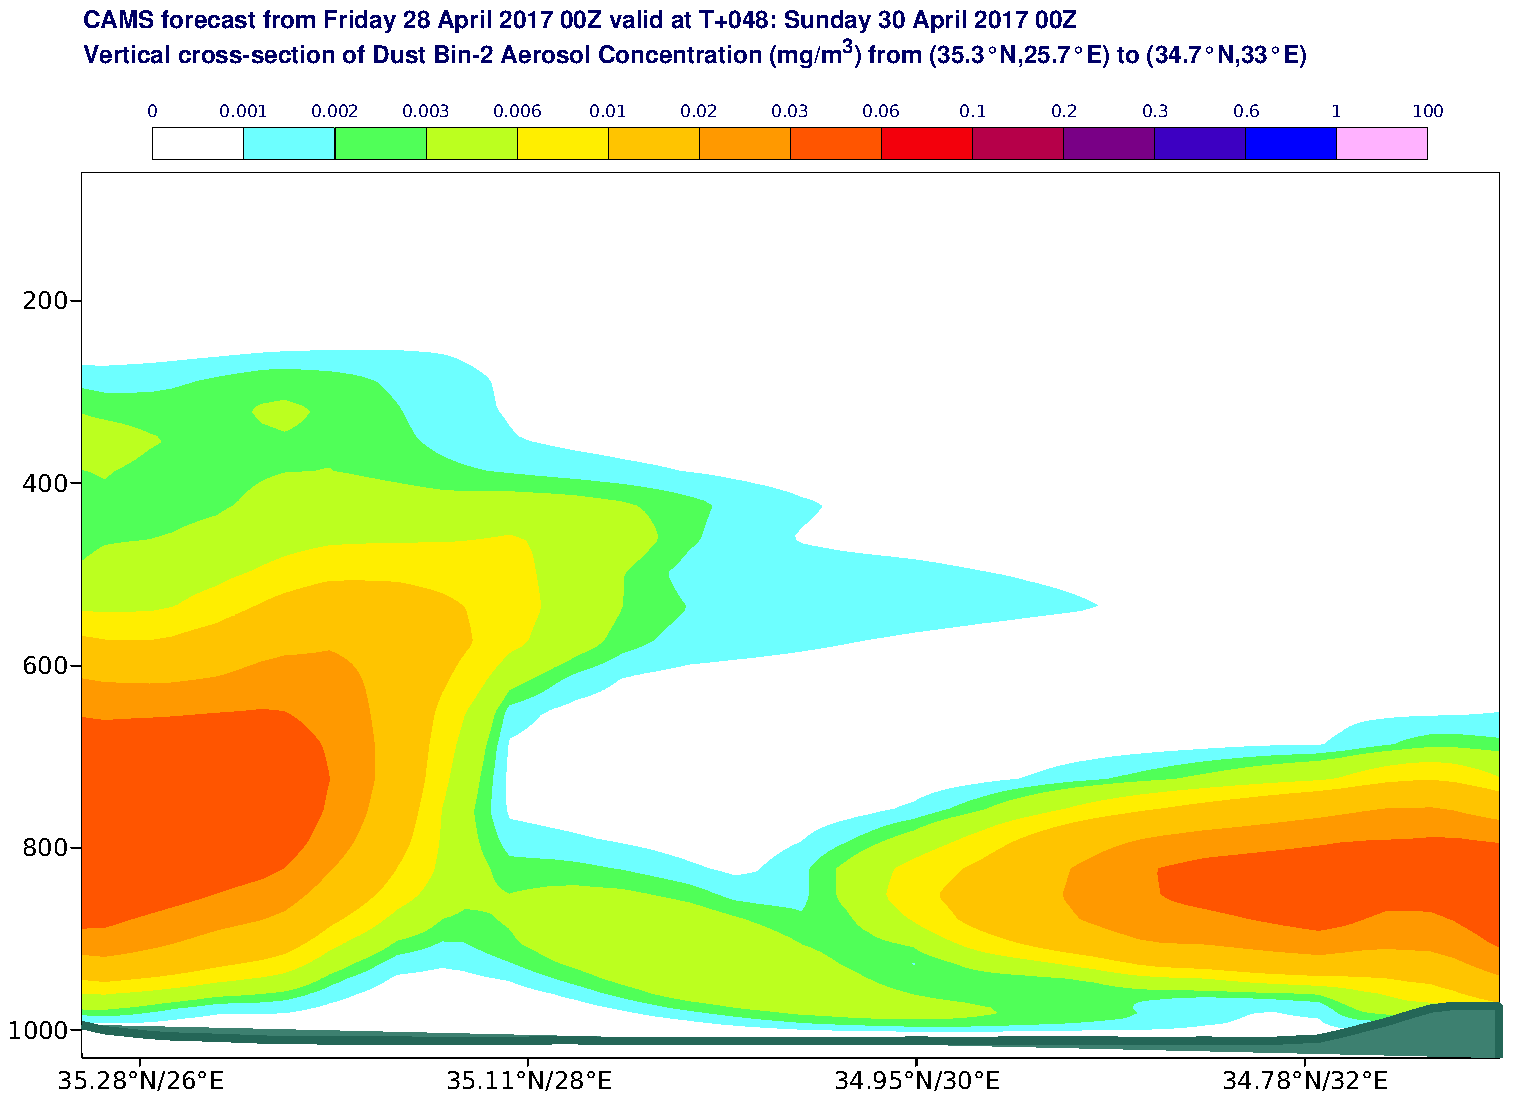 Vertical cross-section of Dust Bin-2 Aerosol Concentration (mg/m3) valid at T48 - 2017-04-30 00:00